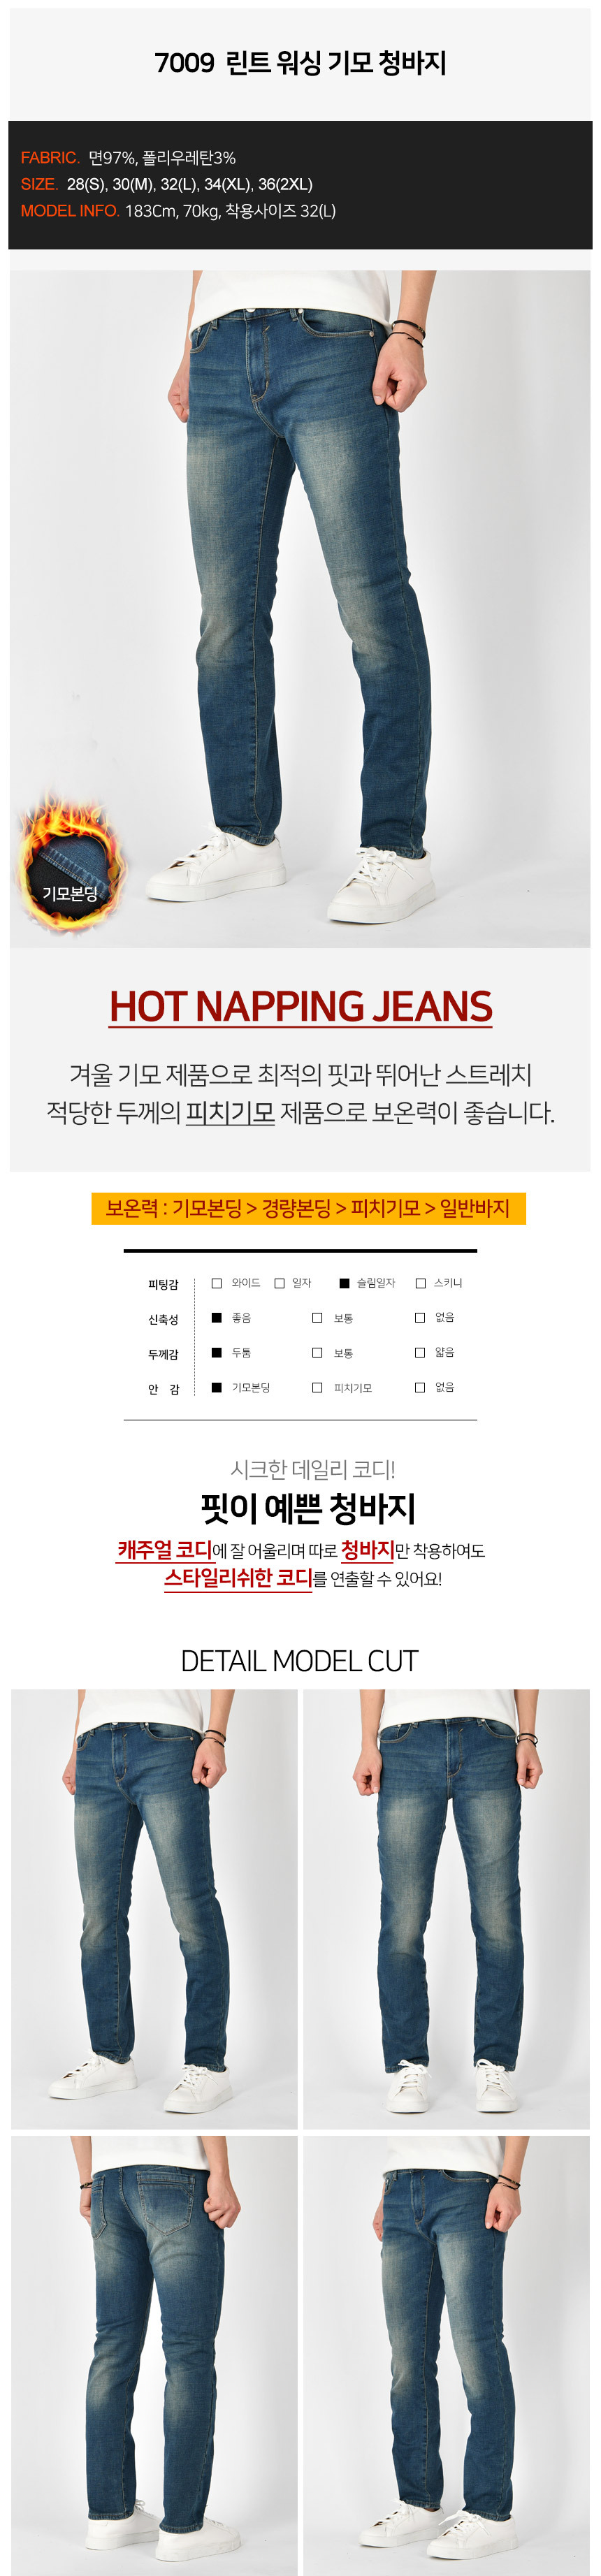 HOTCODE JEANS